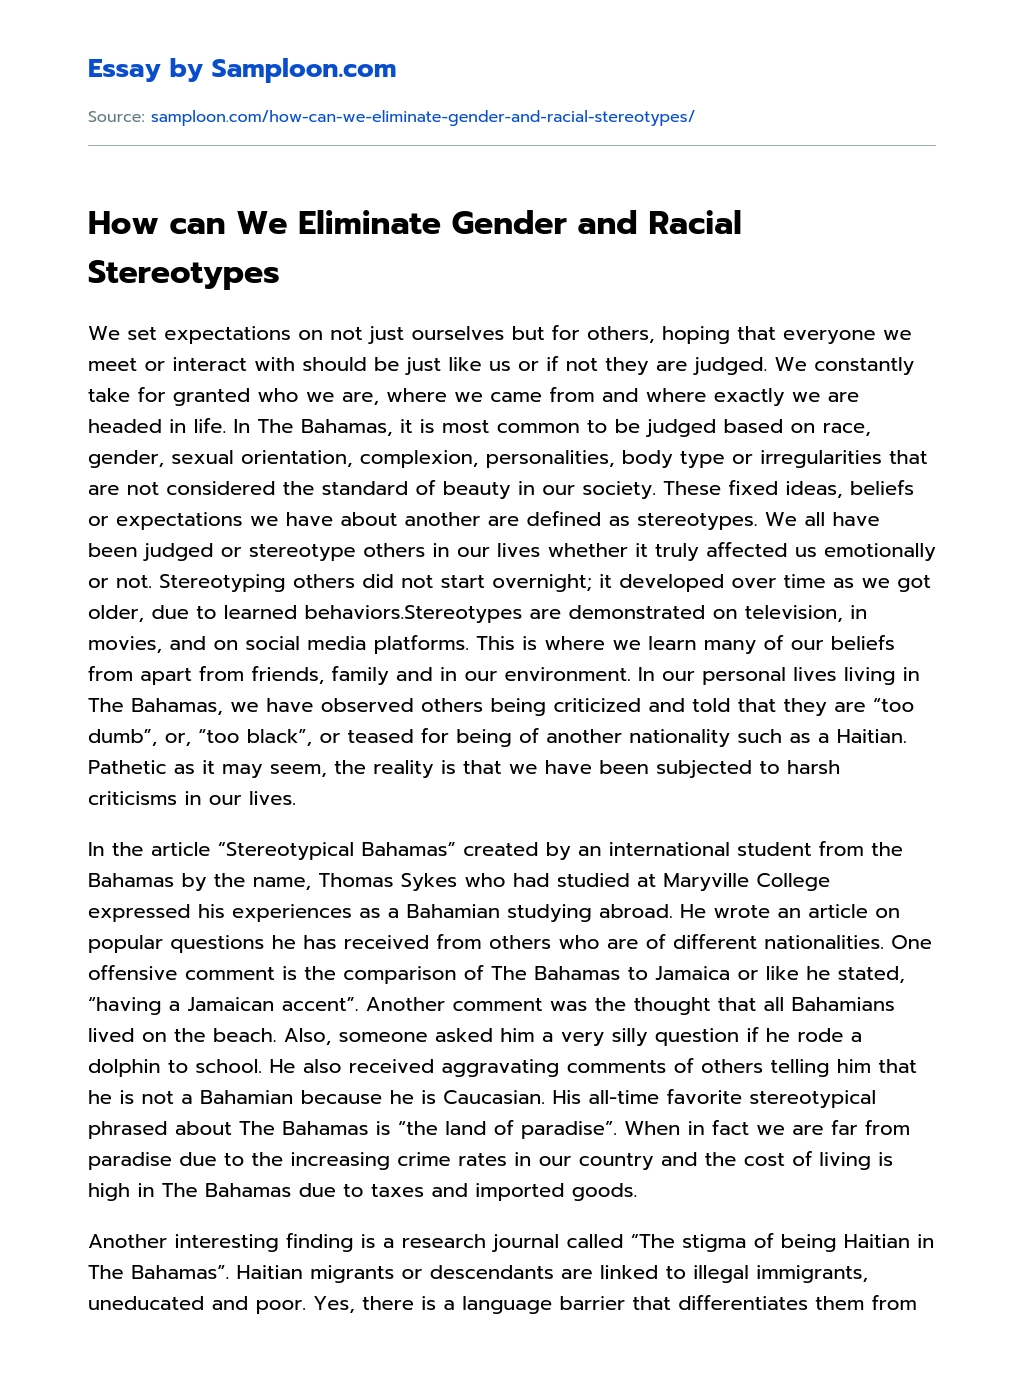 How can We Eliminate Gender and Racial Stereotypes essay